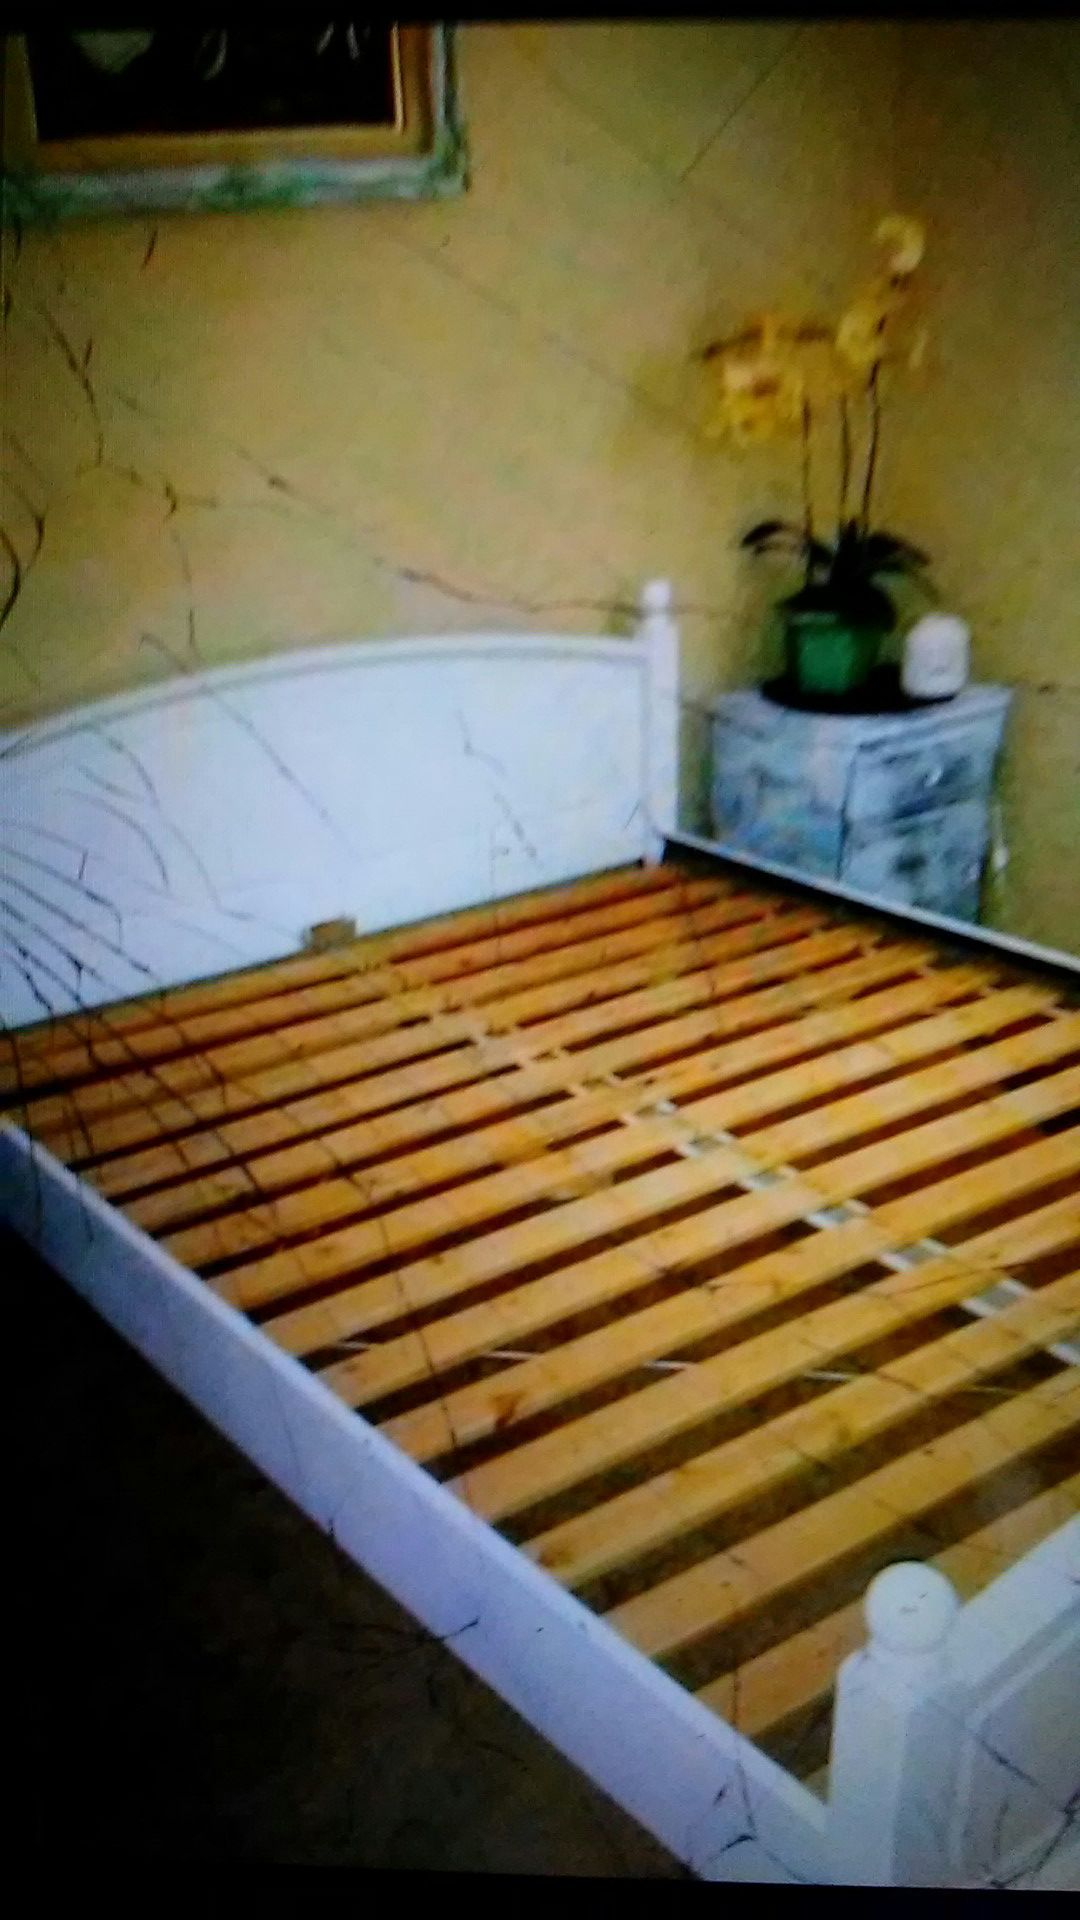 Queen size bed frame with mattress